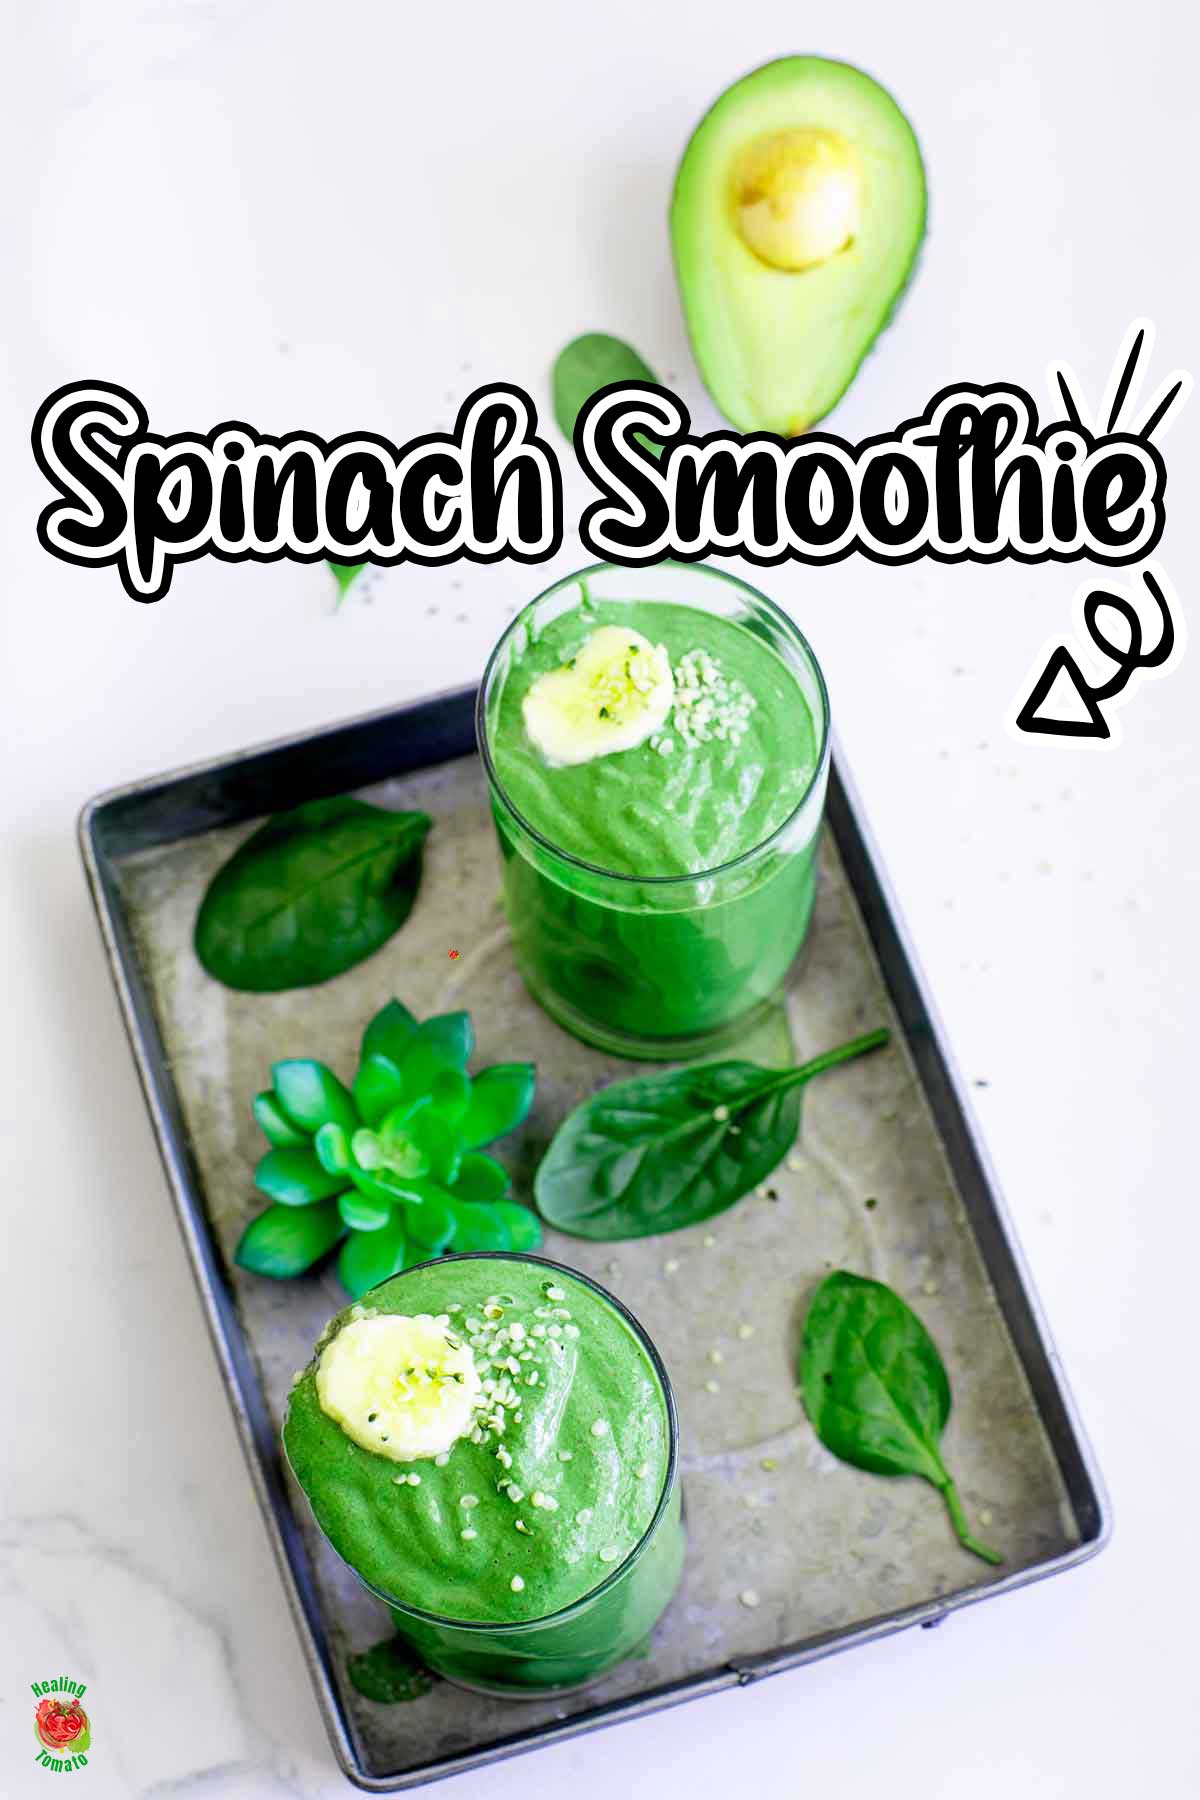 overhead view of 2 glasses filled with spinach smoothie on a grey tray.